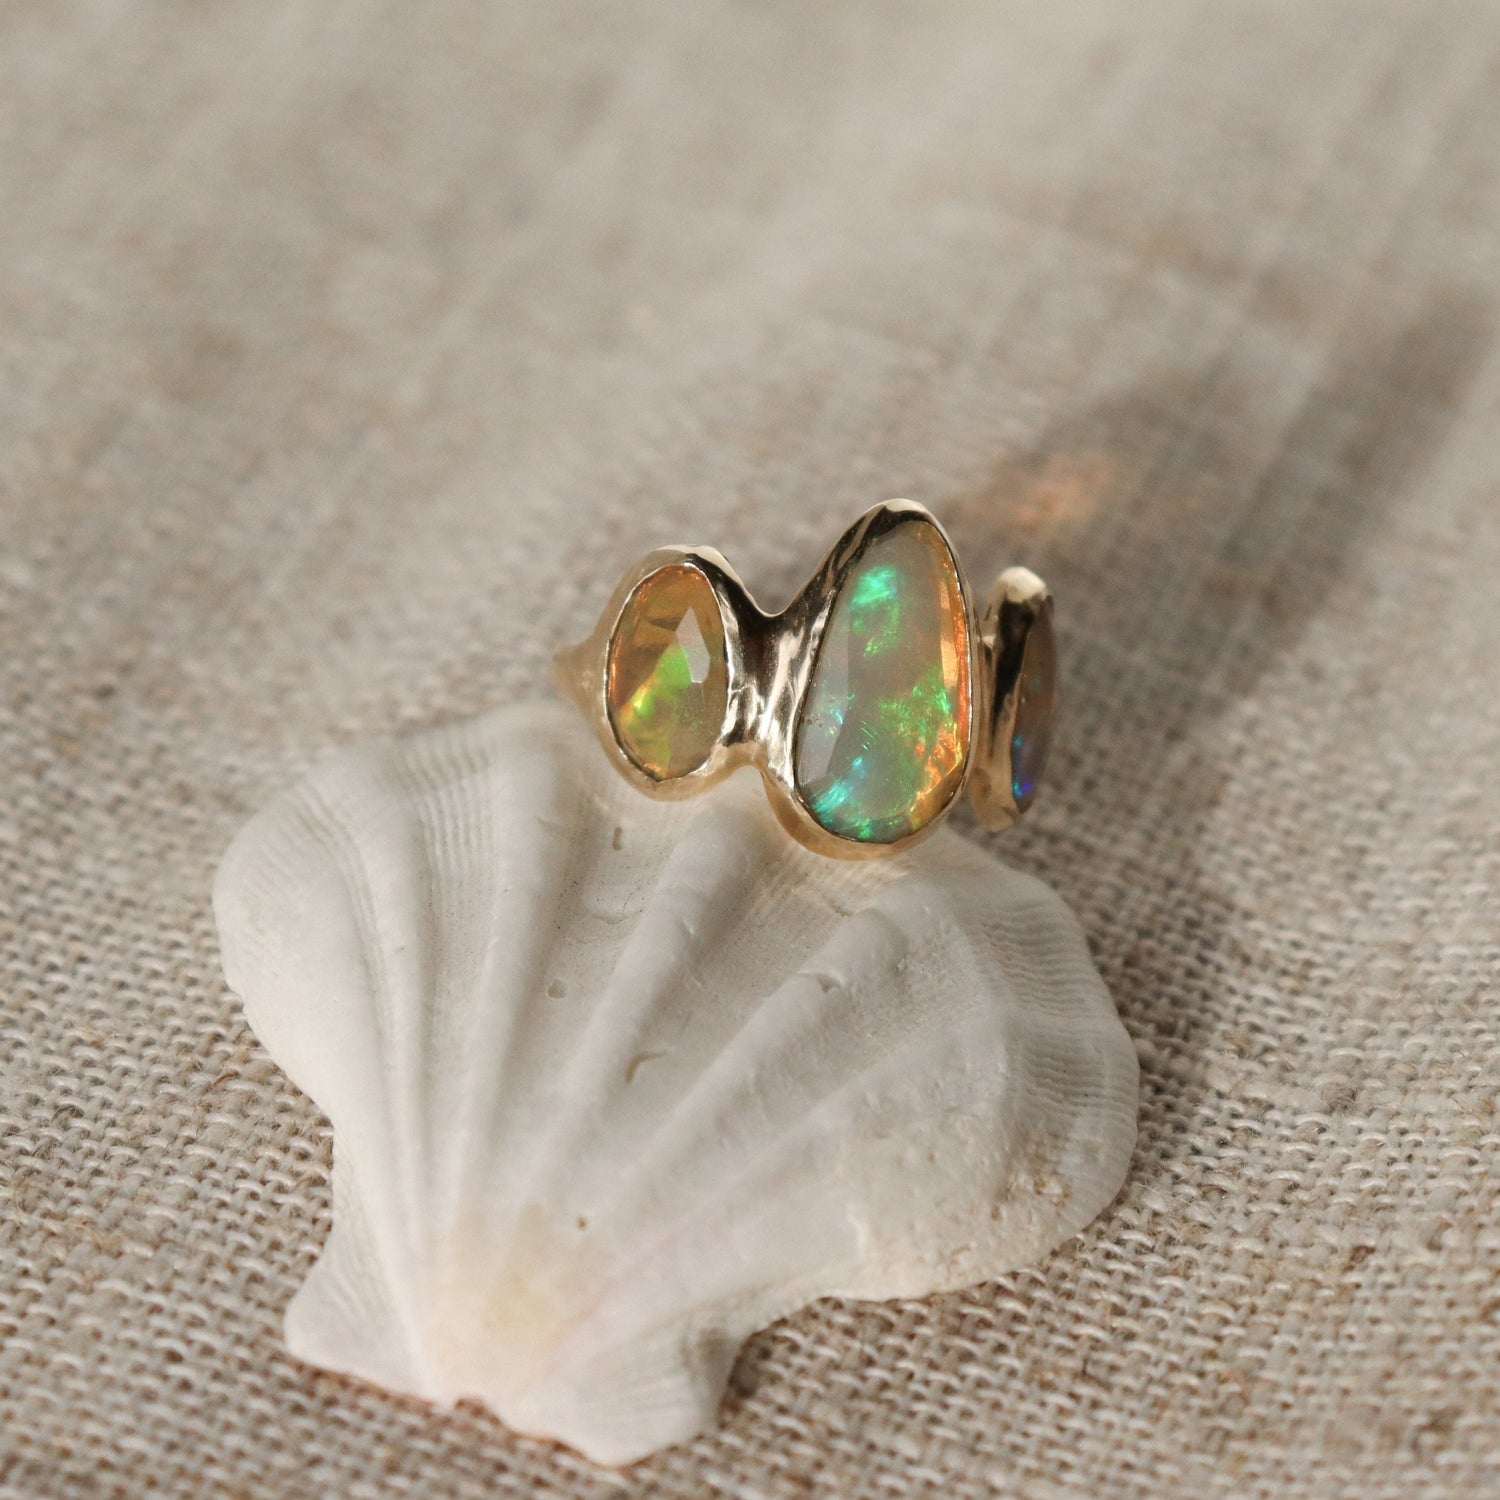 Three opals are bezel set on an organically handcrafted 14k gold band.